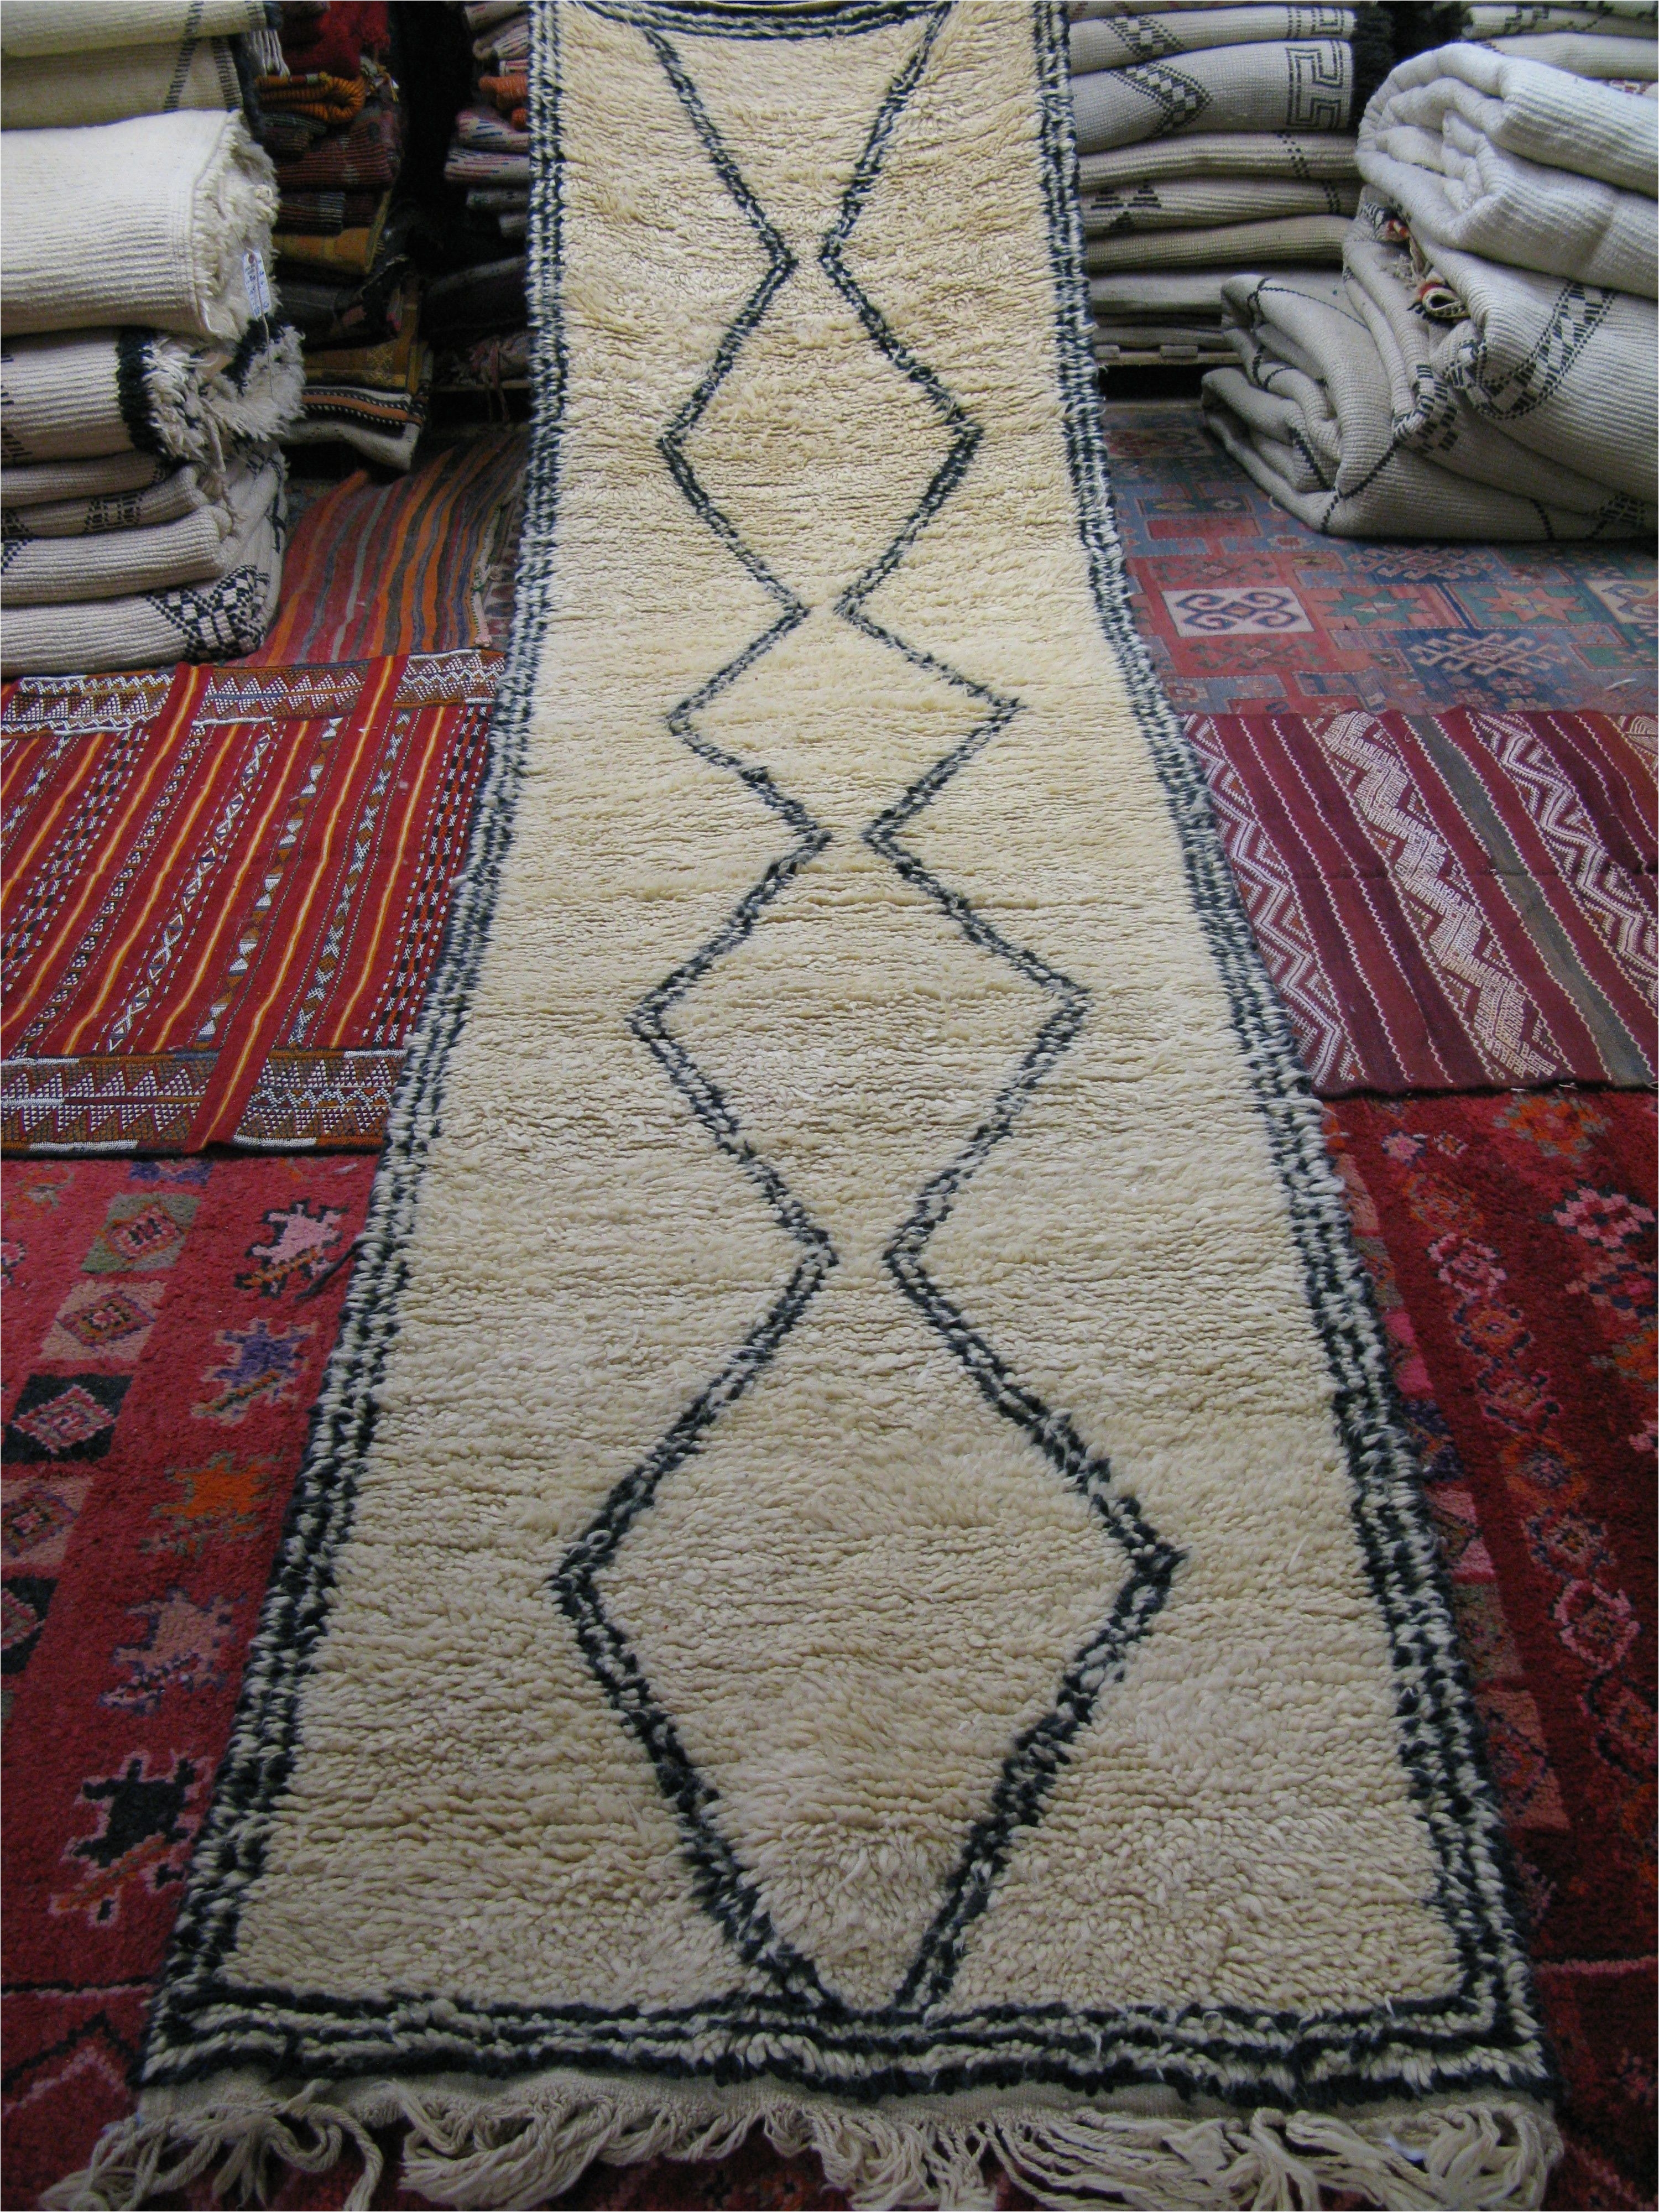 beni ourain runner by imports from marrakesh www importsfrommarrakesh com hand woven